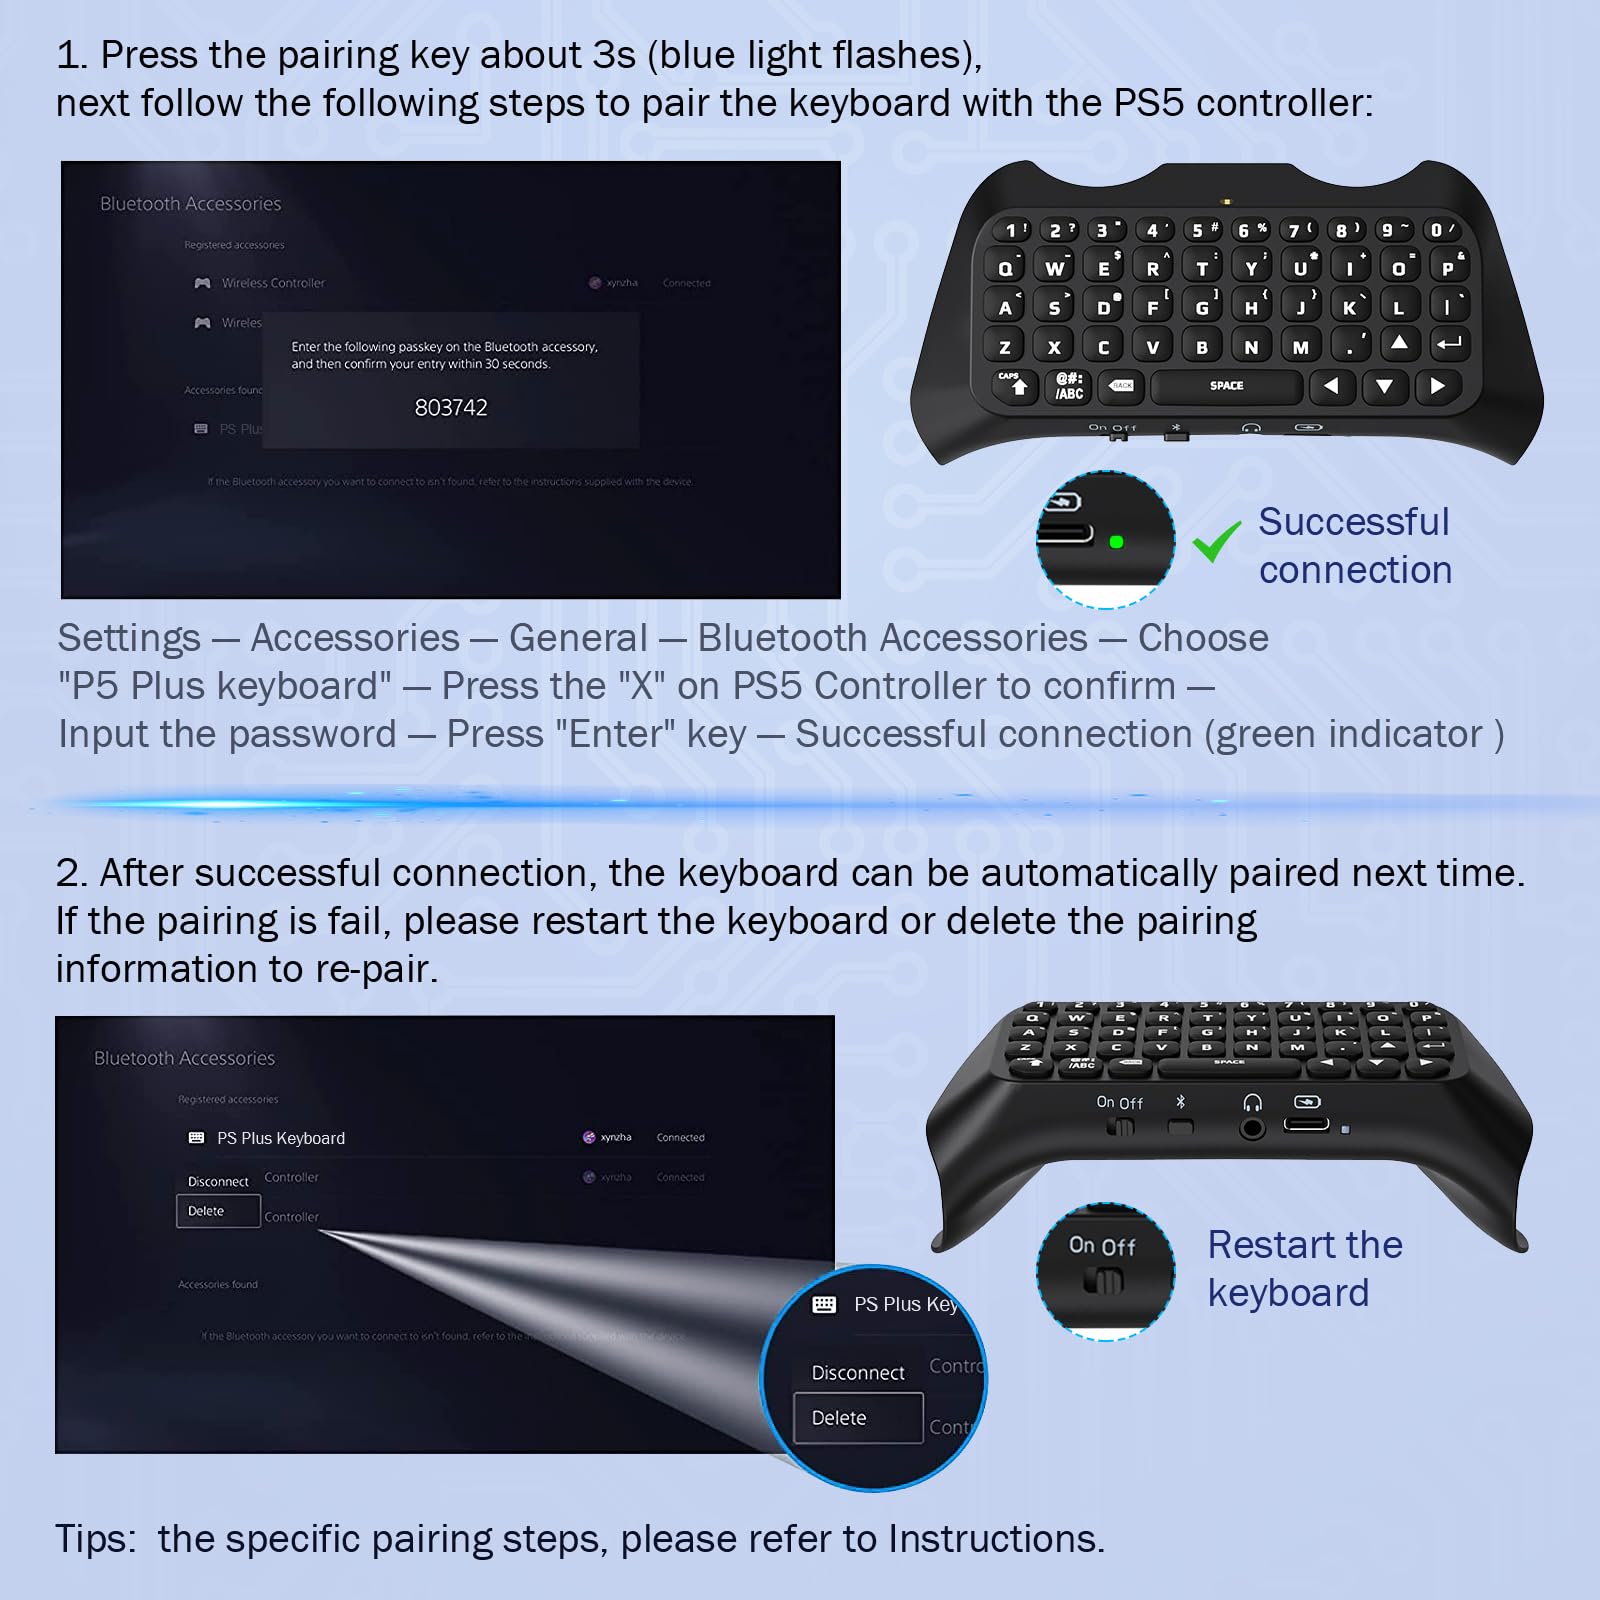 MoKo Keyboard for PS5 Controller with Green Backlight, Bluetooth Wireless Mini Keypad Chatpad for Playstation 5, Built-in Speaker & 3.5mm Audio Jack for PS5 Controller Accessories - amzGamess